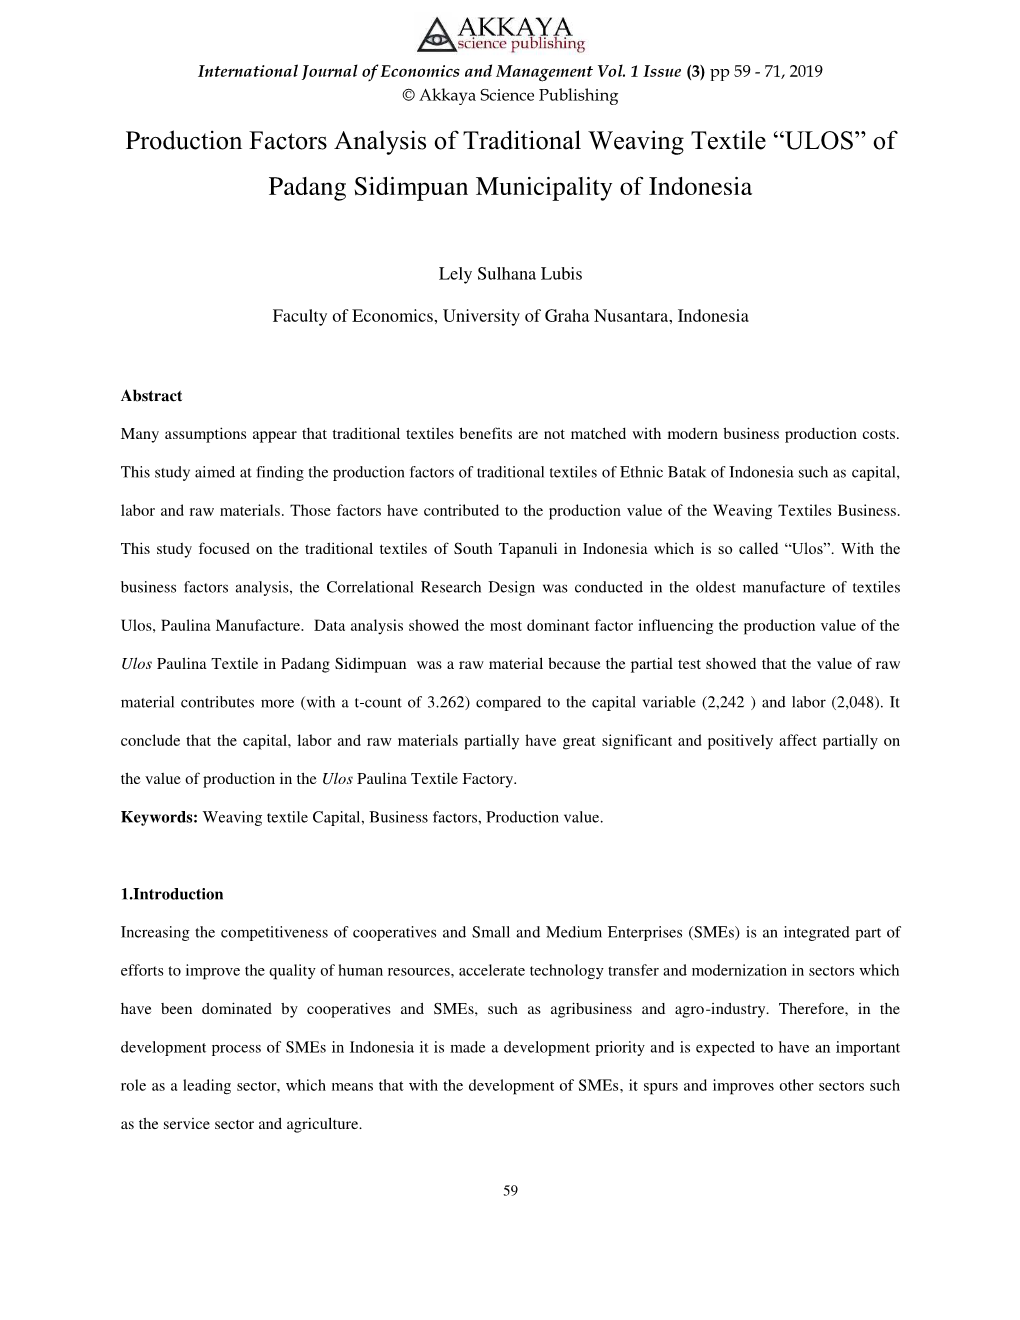 Production Factors Analysis of Traditional Weaving Textile —ULOS“ of Padang Sidimpuan Municipality of Indonesia